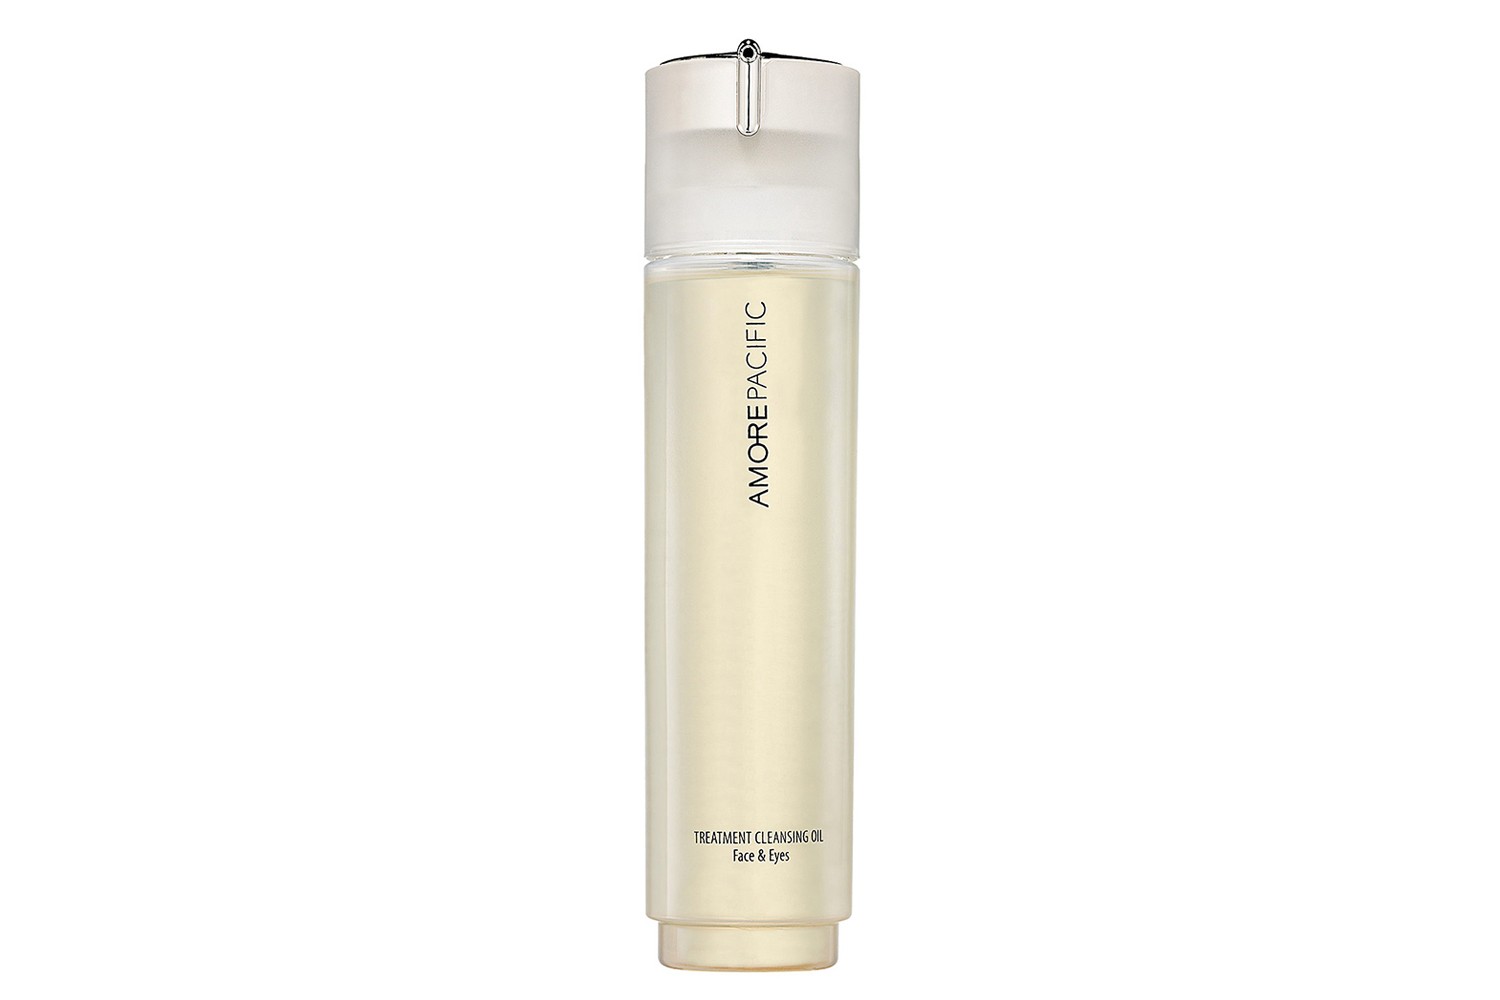 Treatment Cleansing Oil, Amore Pacific (US$ 50)